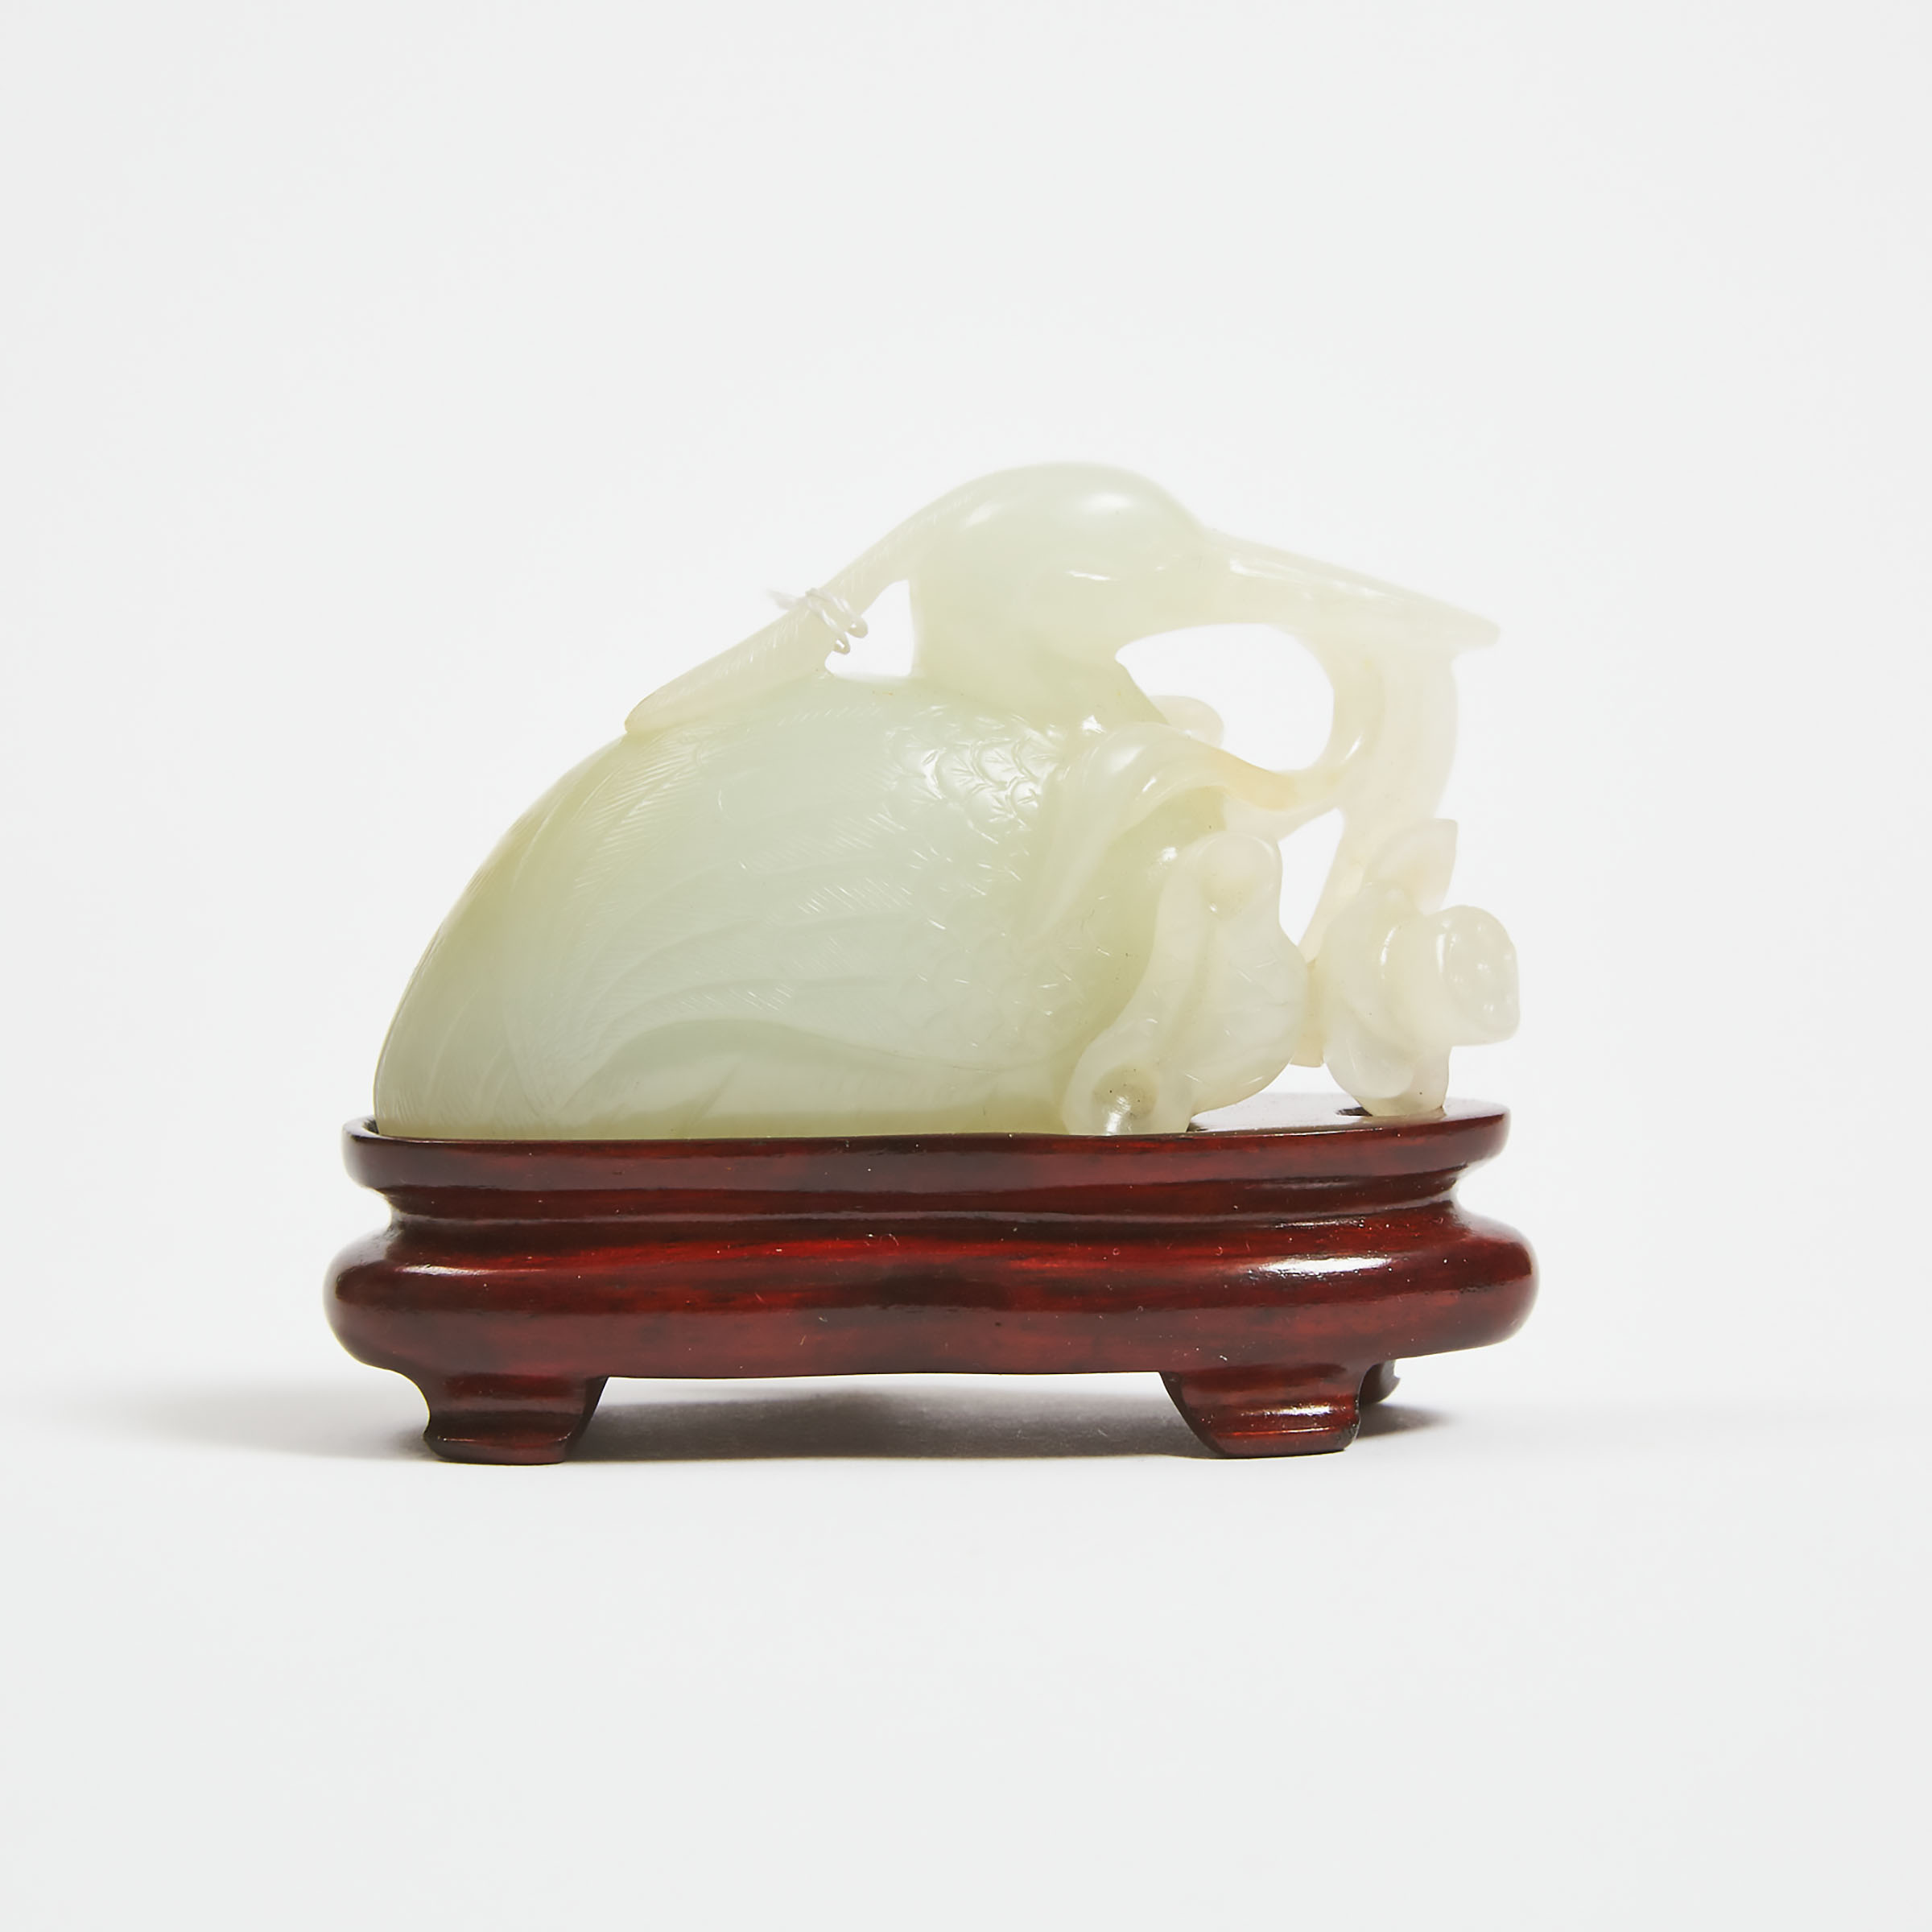 A White Jade Carving of an Egret, Qing Dynasty, 19th Century